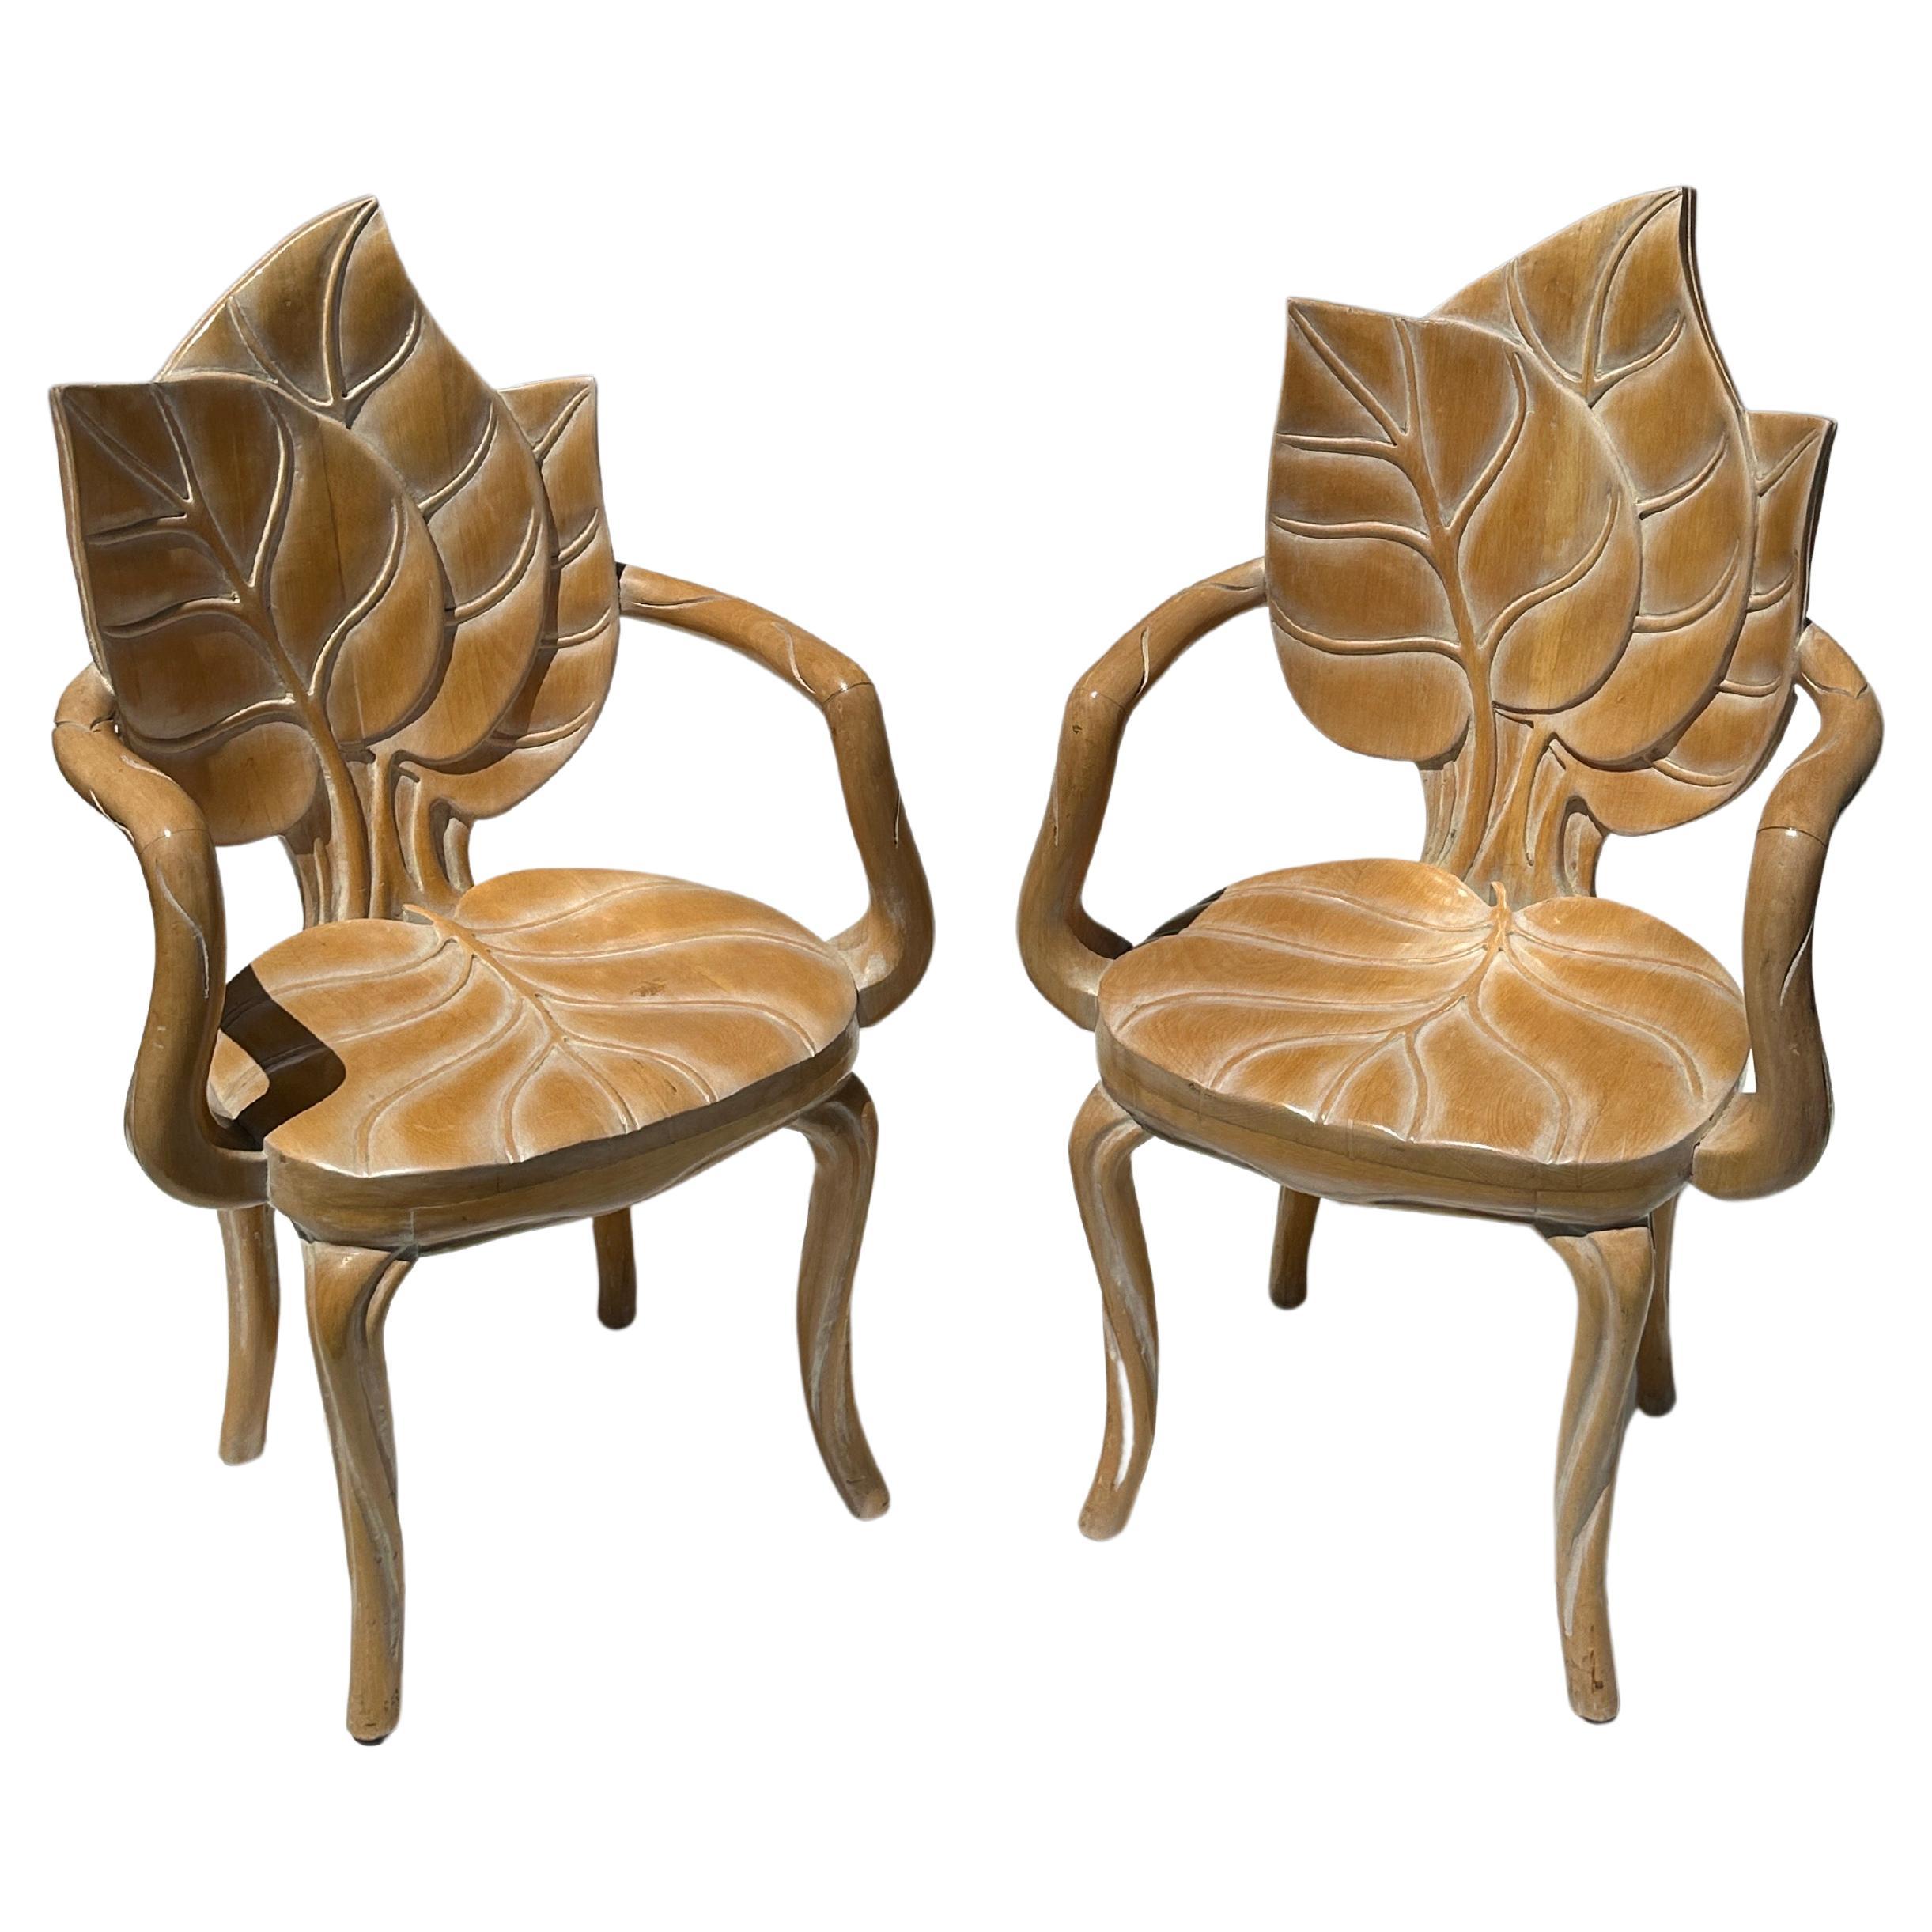 Pair of Rhubarb Leaf Grotto Style Armchairs  For Sale